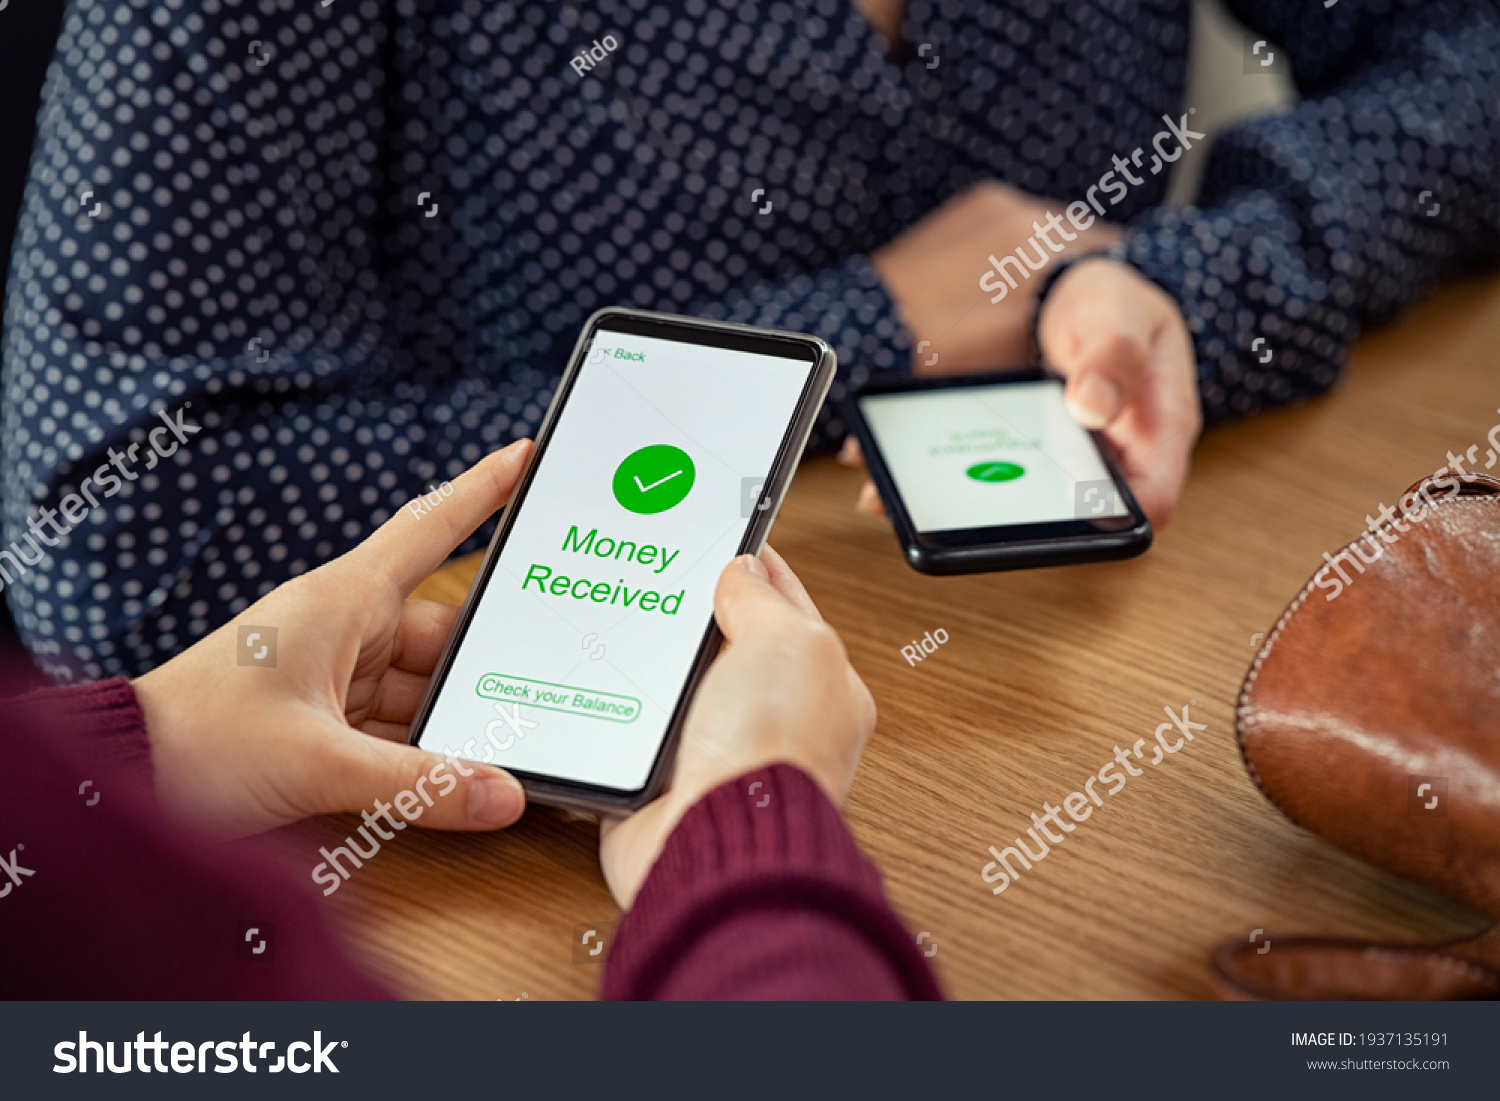 Close up of woman hands holding mobile phone with application to receive money. People holding smart phone and making cashless payment transaction. Smartphone screen displaying money received message. #1937135191